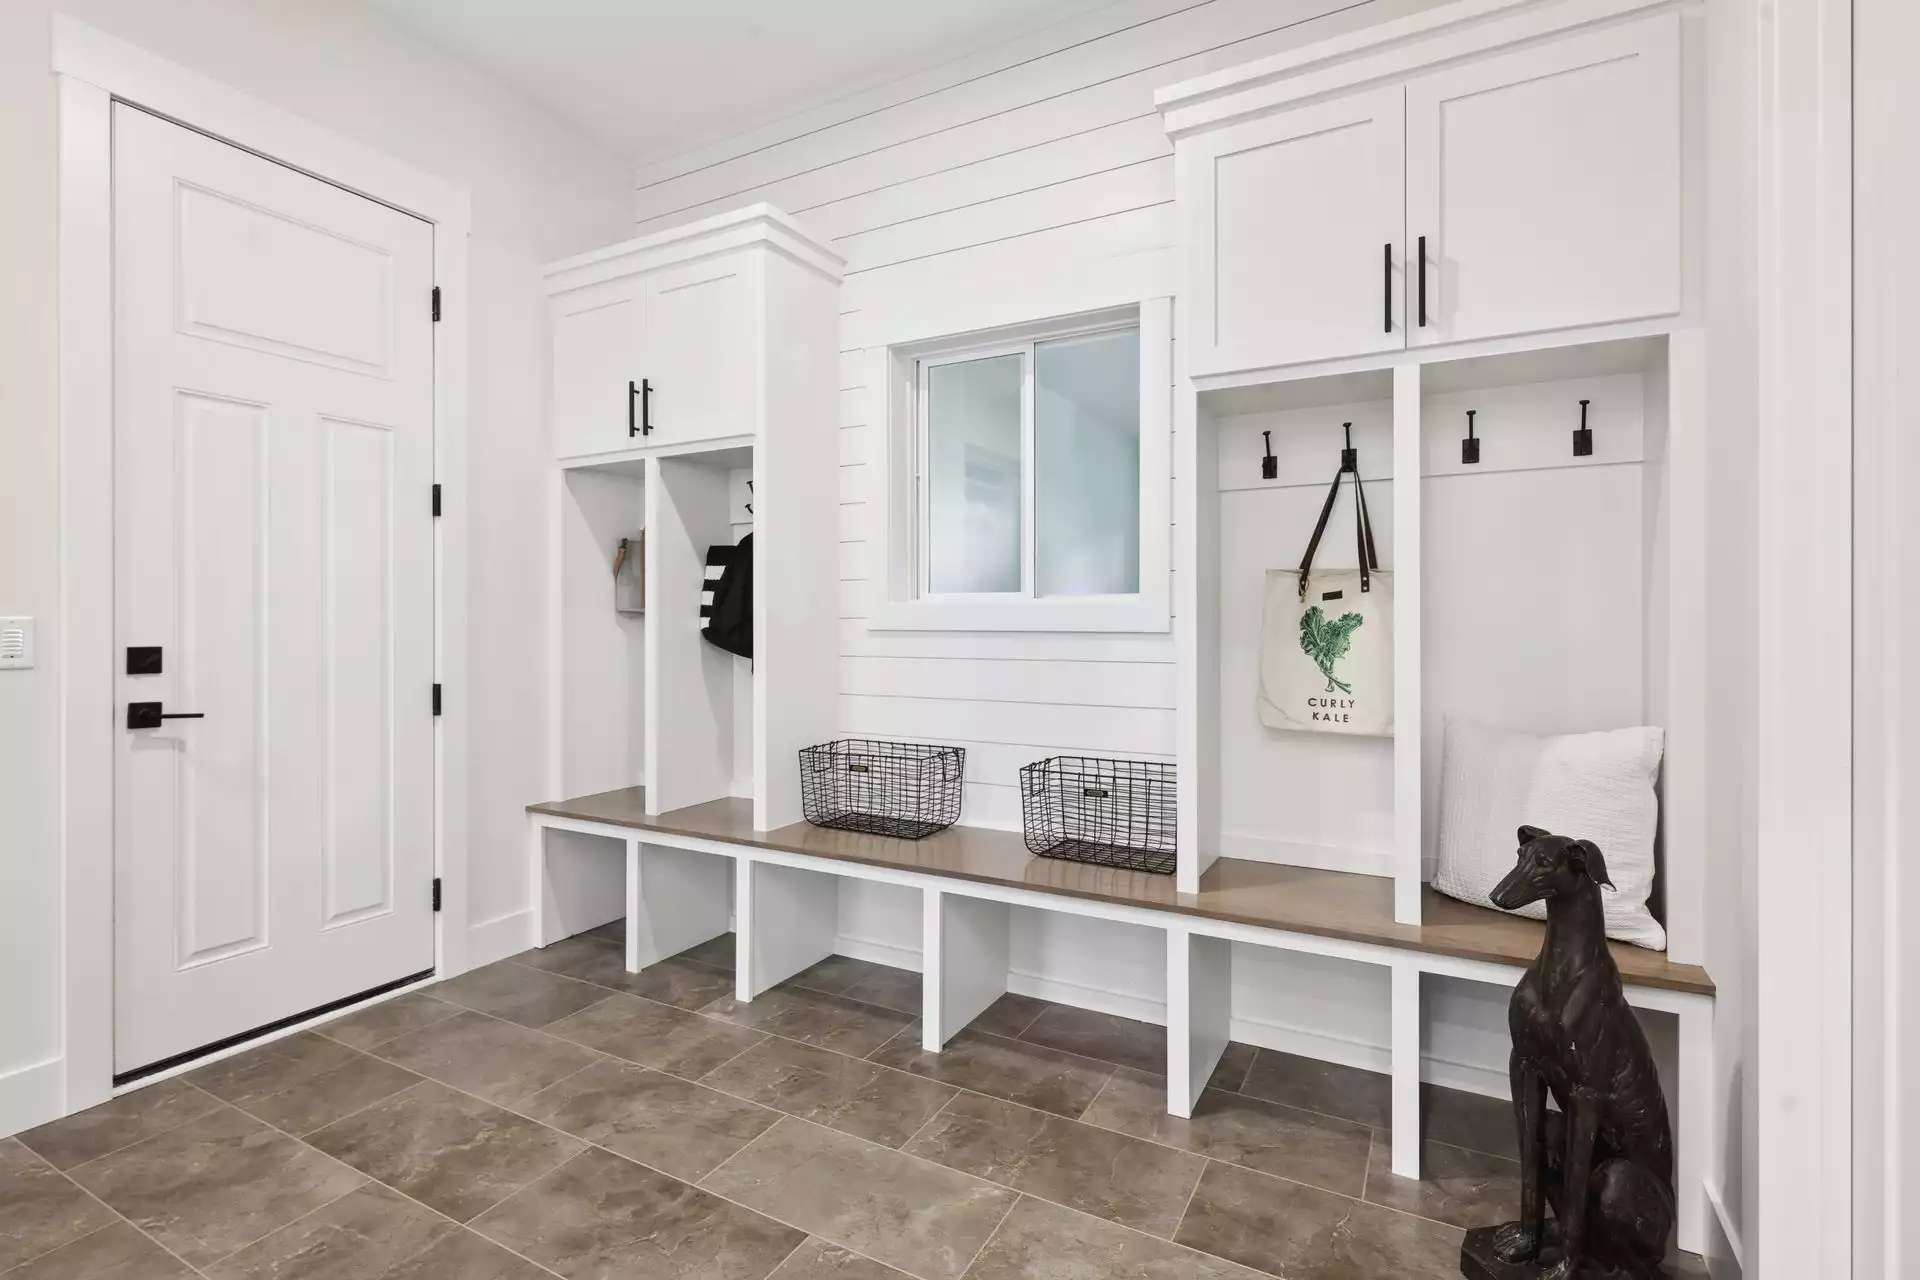 Mud room with built-in cubbies and storage